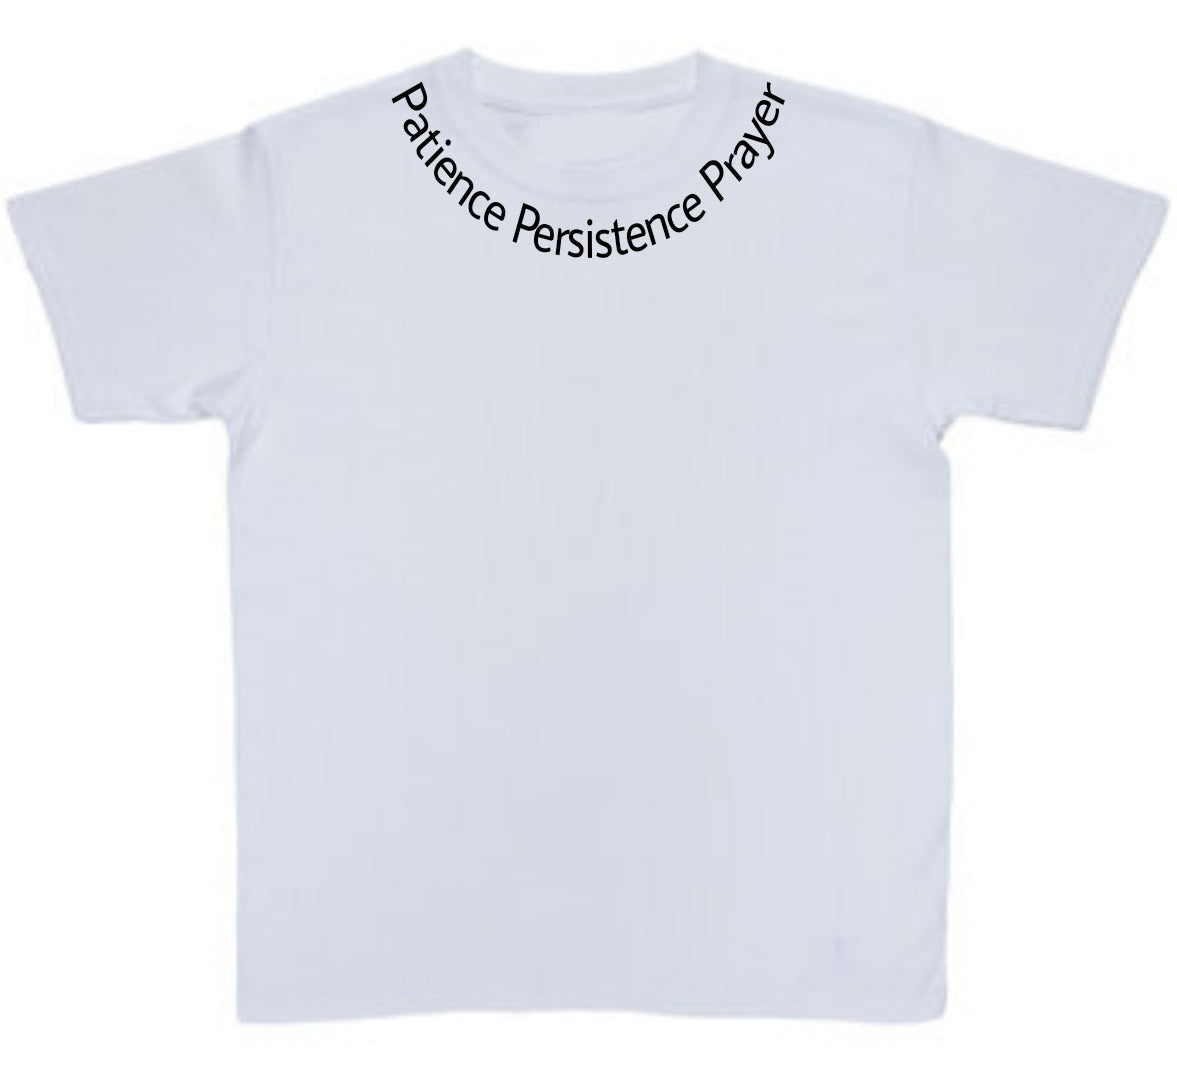 "Patience, Persistence, and Prayer" Youth Tee